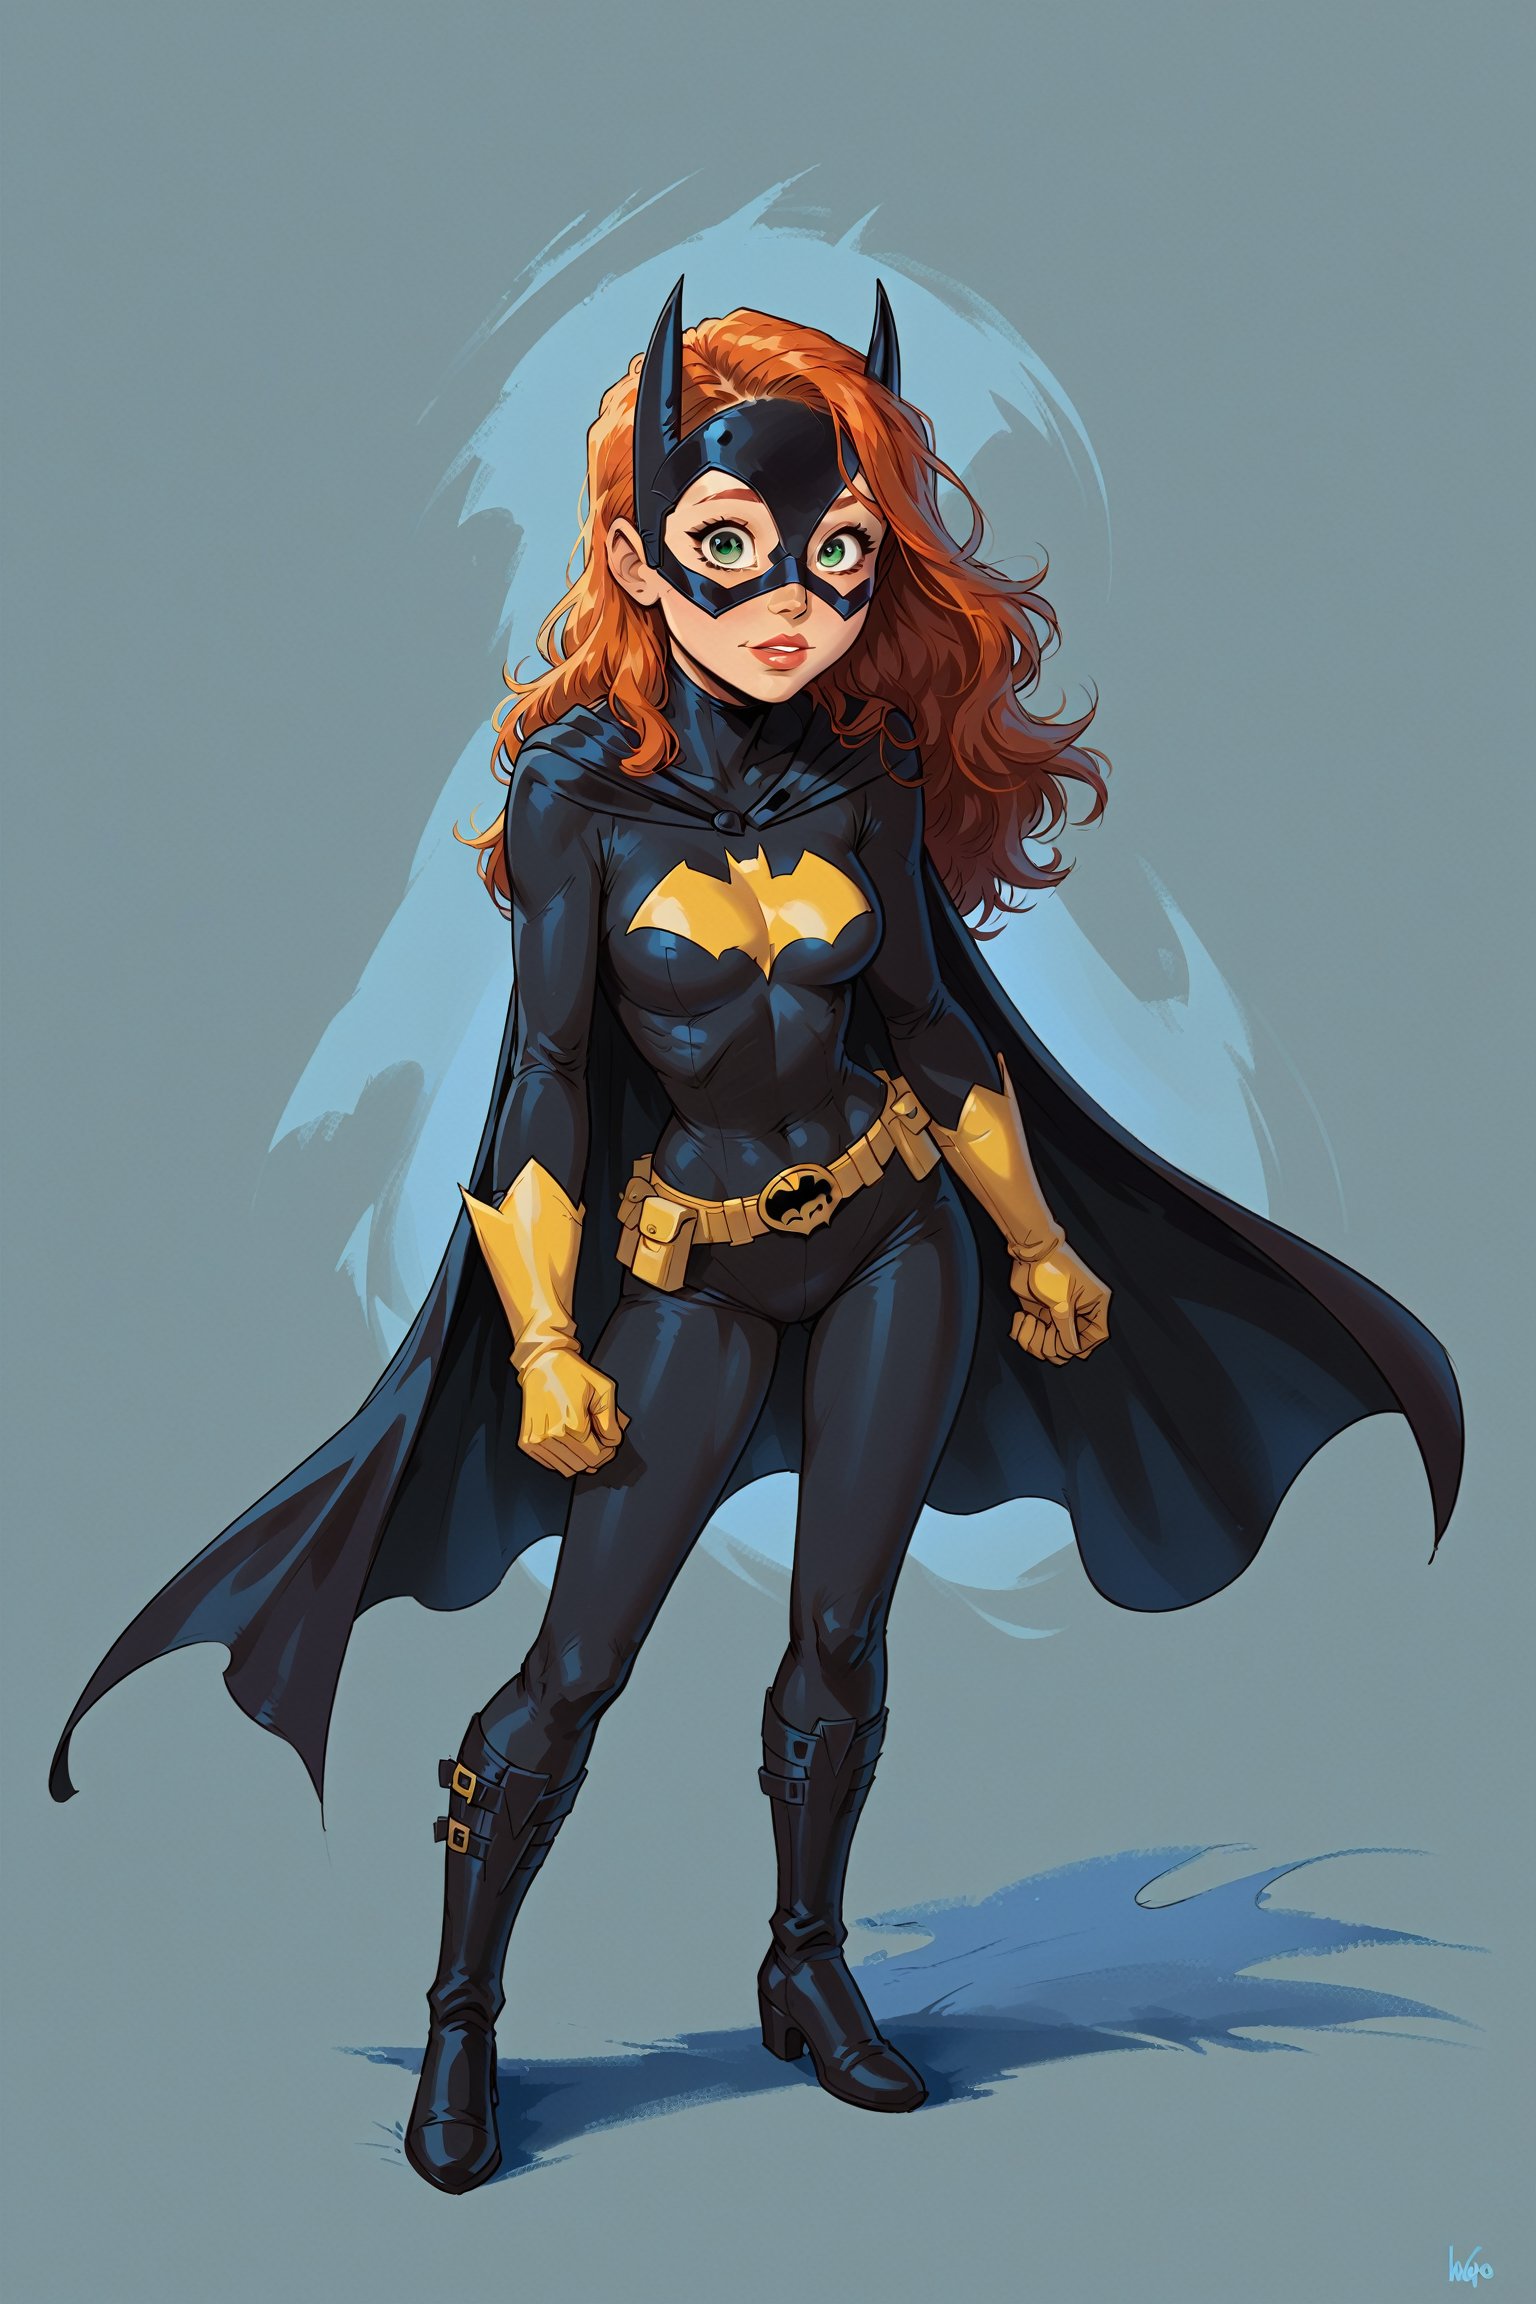 score_9,score_8_up,score_7_up,score_6_up, 1girl, stuningly beautiful female focus, batgirl from DC comics (:1.9) 15yrs, petite build, child like focus, big eyes, cute, intense green eyes, standing_up, legs spread, midriff_peek (:1.1) solo scene (:1.9) full body portrait (:1.9) 300dpi, upscaled 8K, masterpiece, finest quality art, perfect anatomy, perfect hands (:1.9) red hair (:1.9) form fitting (full body) classic (:1.9) young female focus (:1.9) blank background, cute image (:1.9) ,j_cartoon, perfect hands, batgirl cowl (:1.8) 